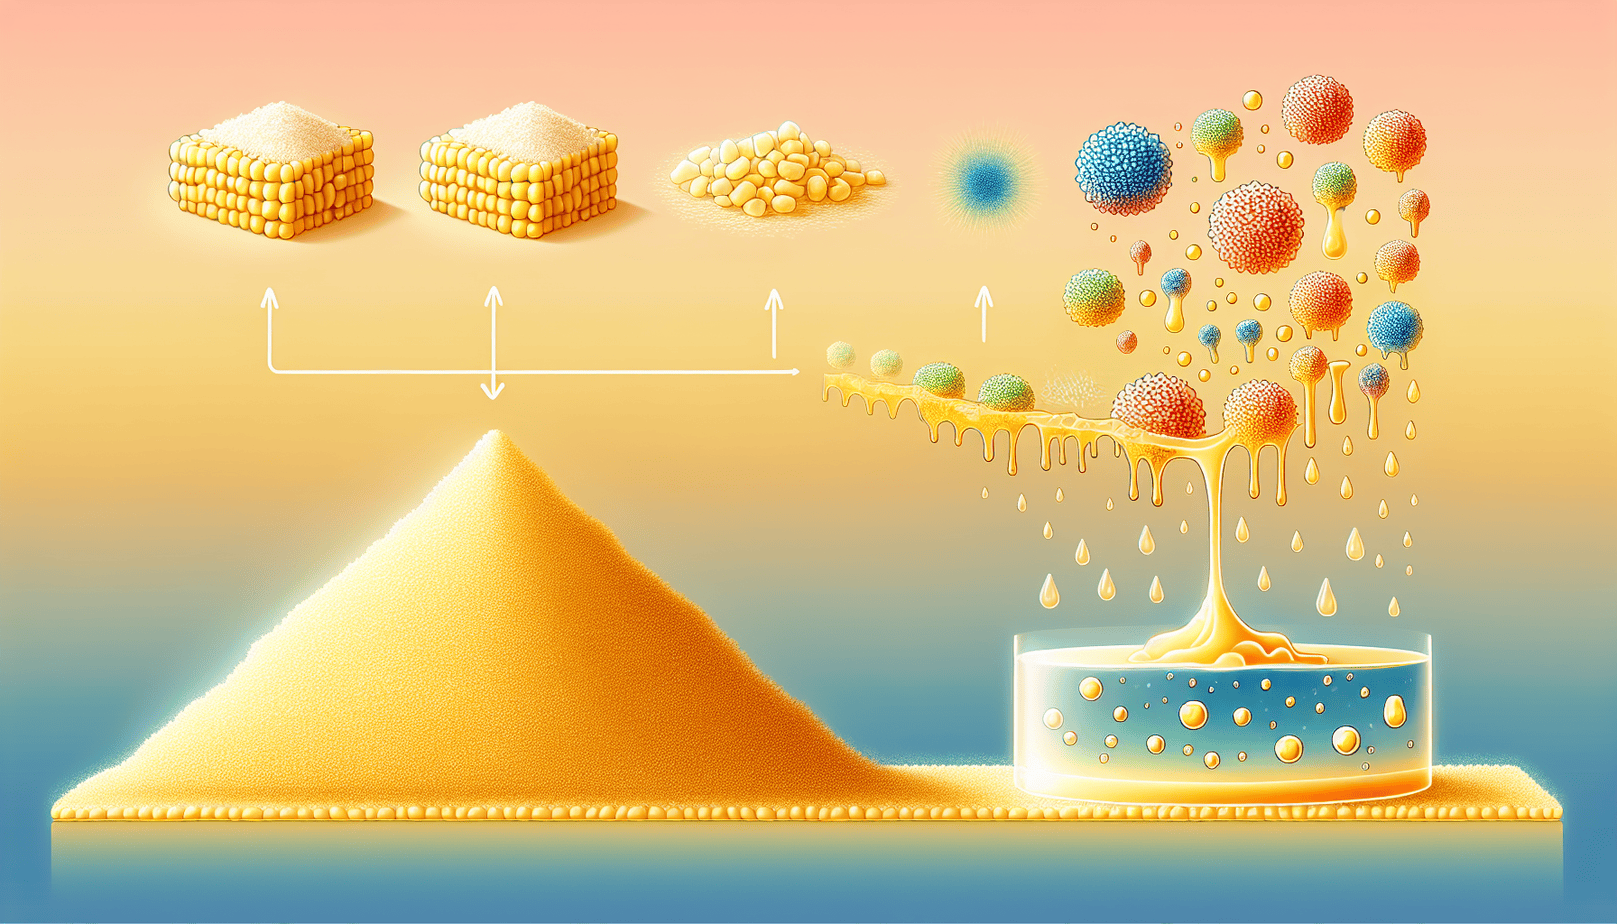 Illustration Of Corn And Corn Syrup Production Process